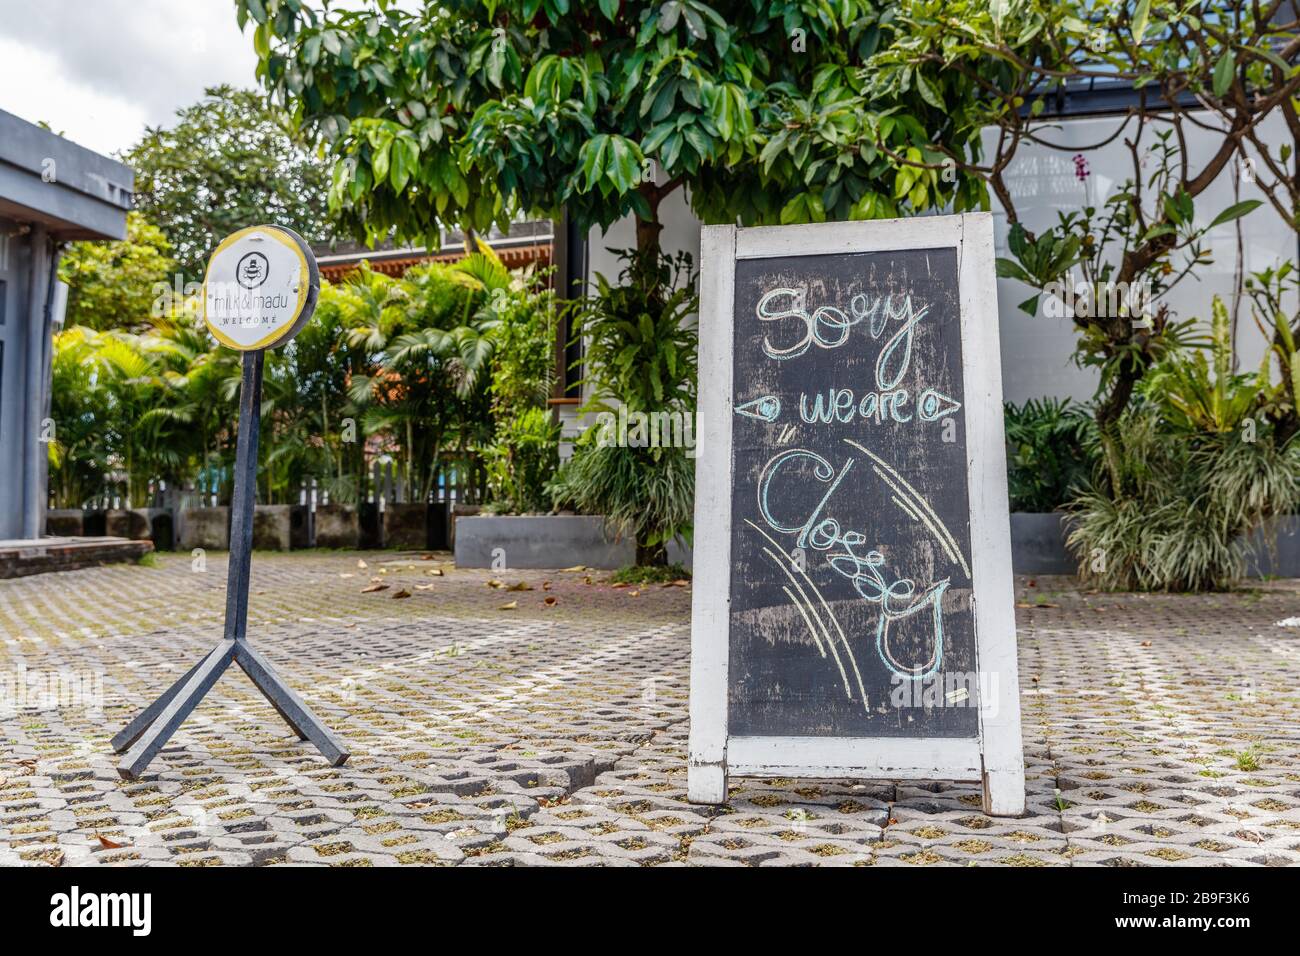 Closed cafes for quarantine for COVID-19. Canggu, one of Bali most popular tourist areas. Indonesia. March 24, 2020. Stock Photo